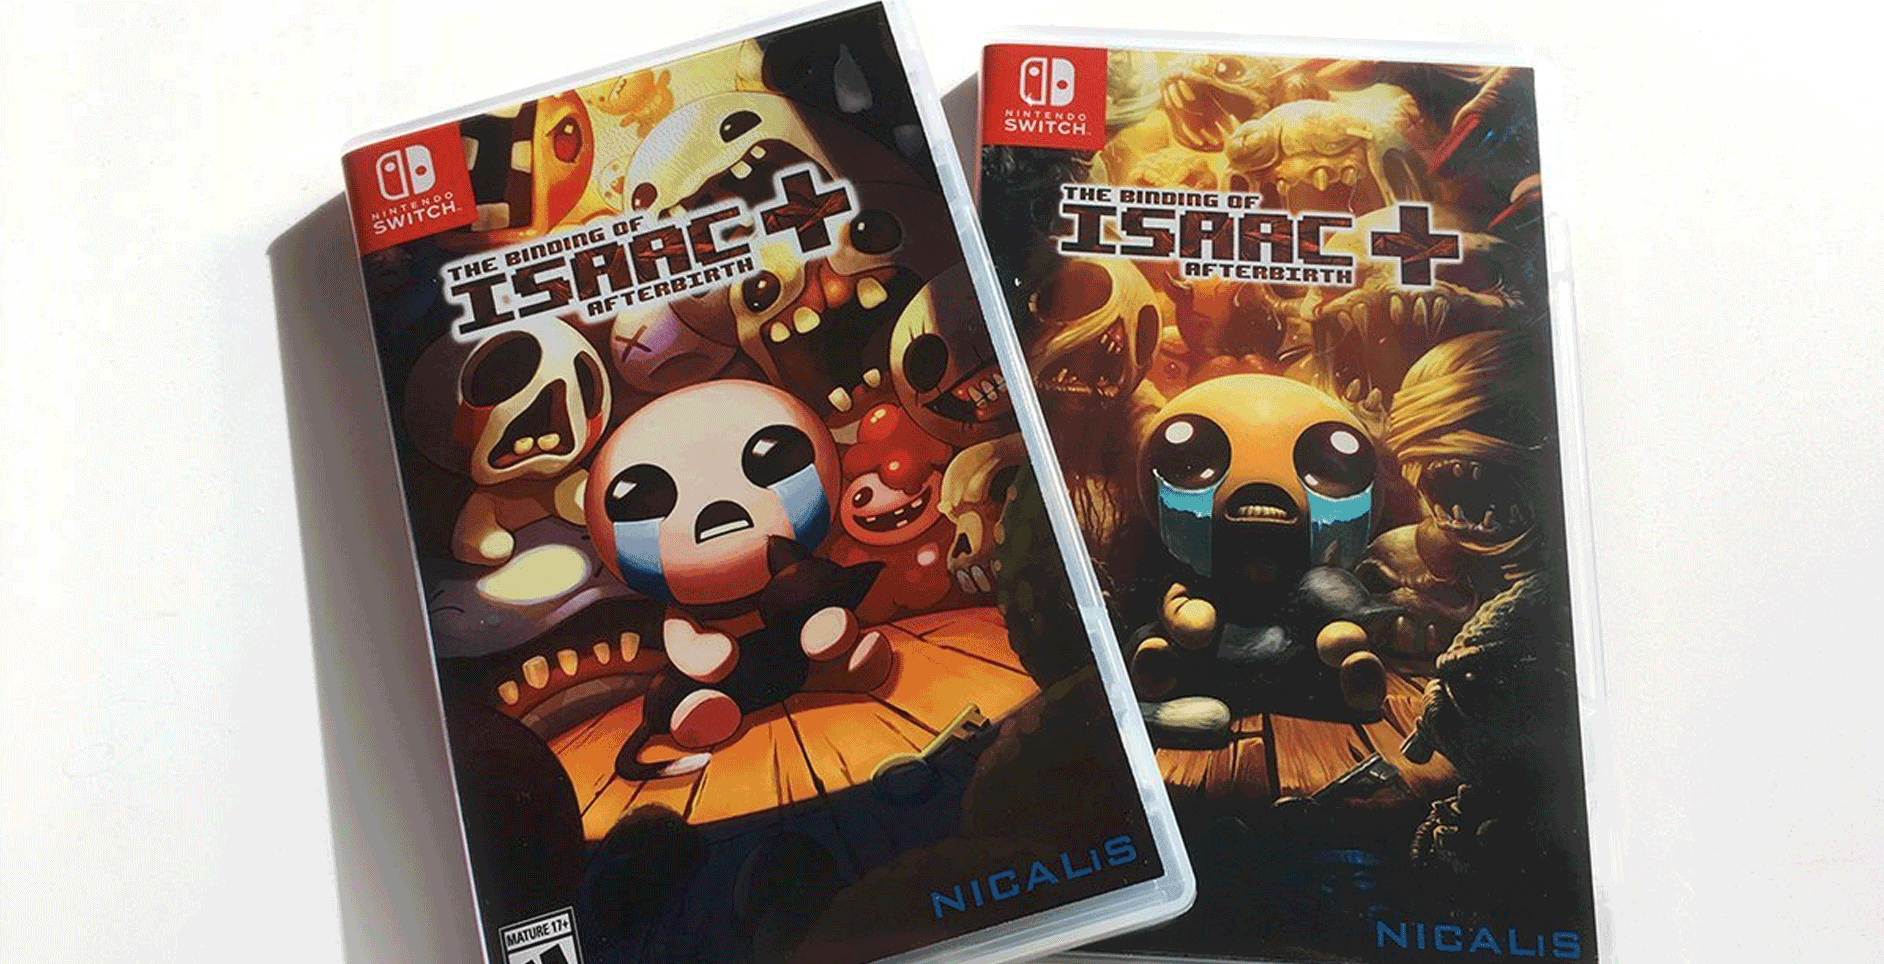 the binding of isaac nintendo switch download free